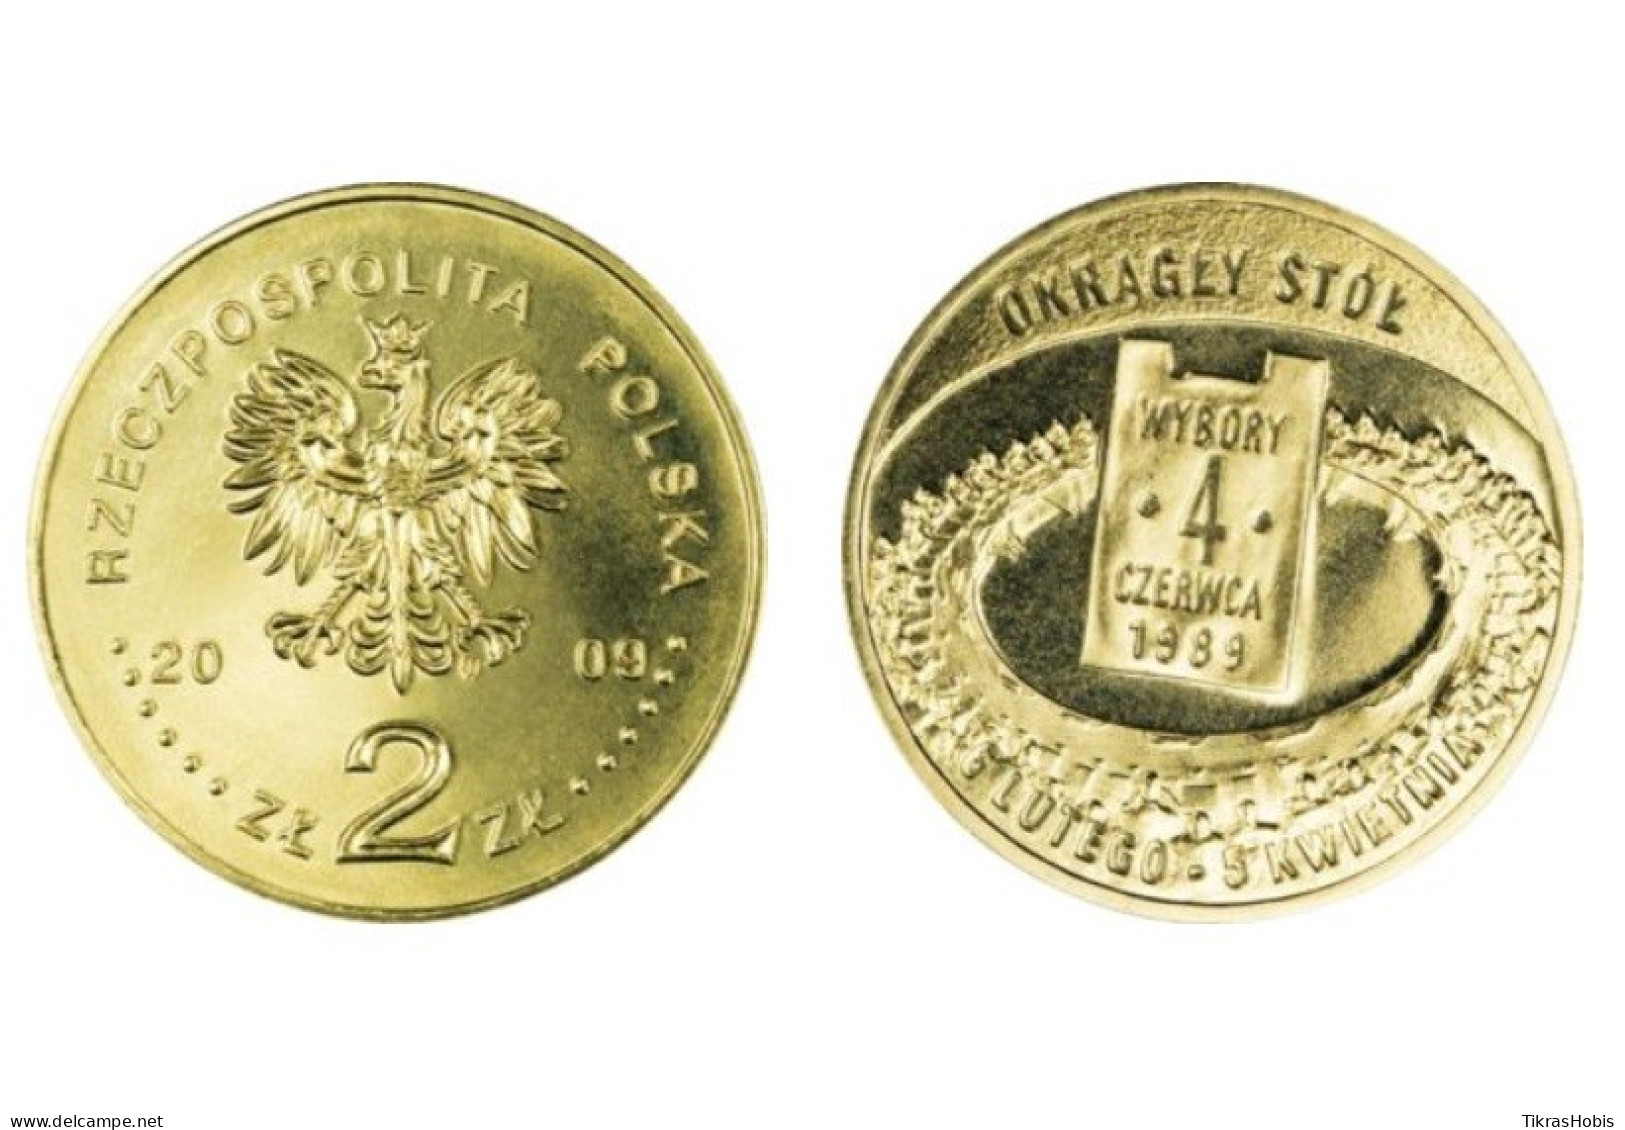 Poland 2 Zlotys 2009 General Election Y680 - Pologne